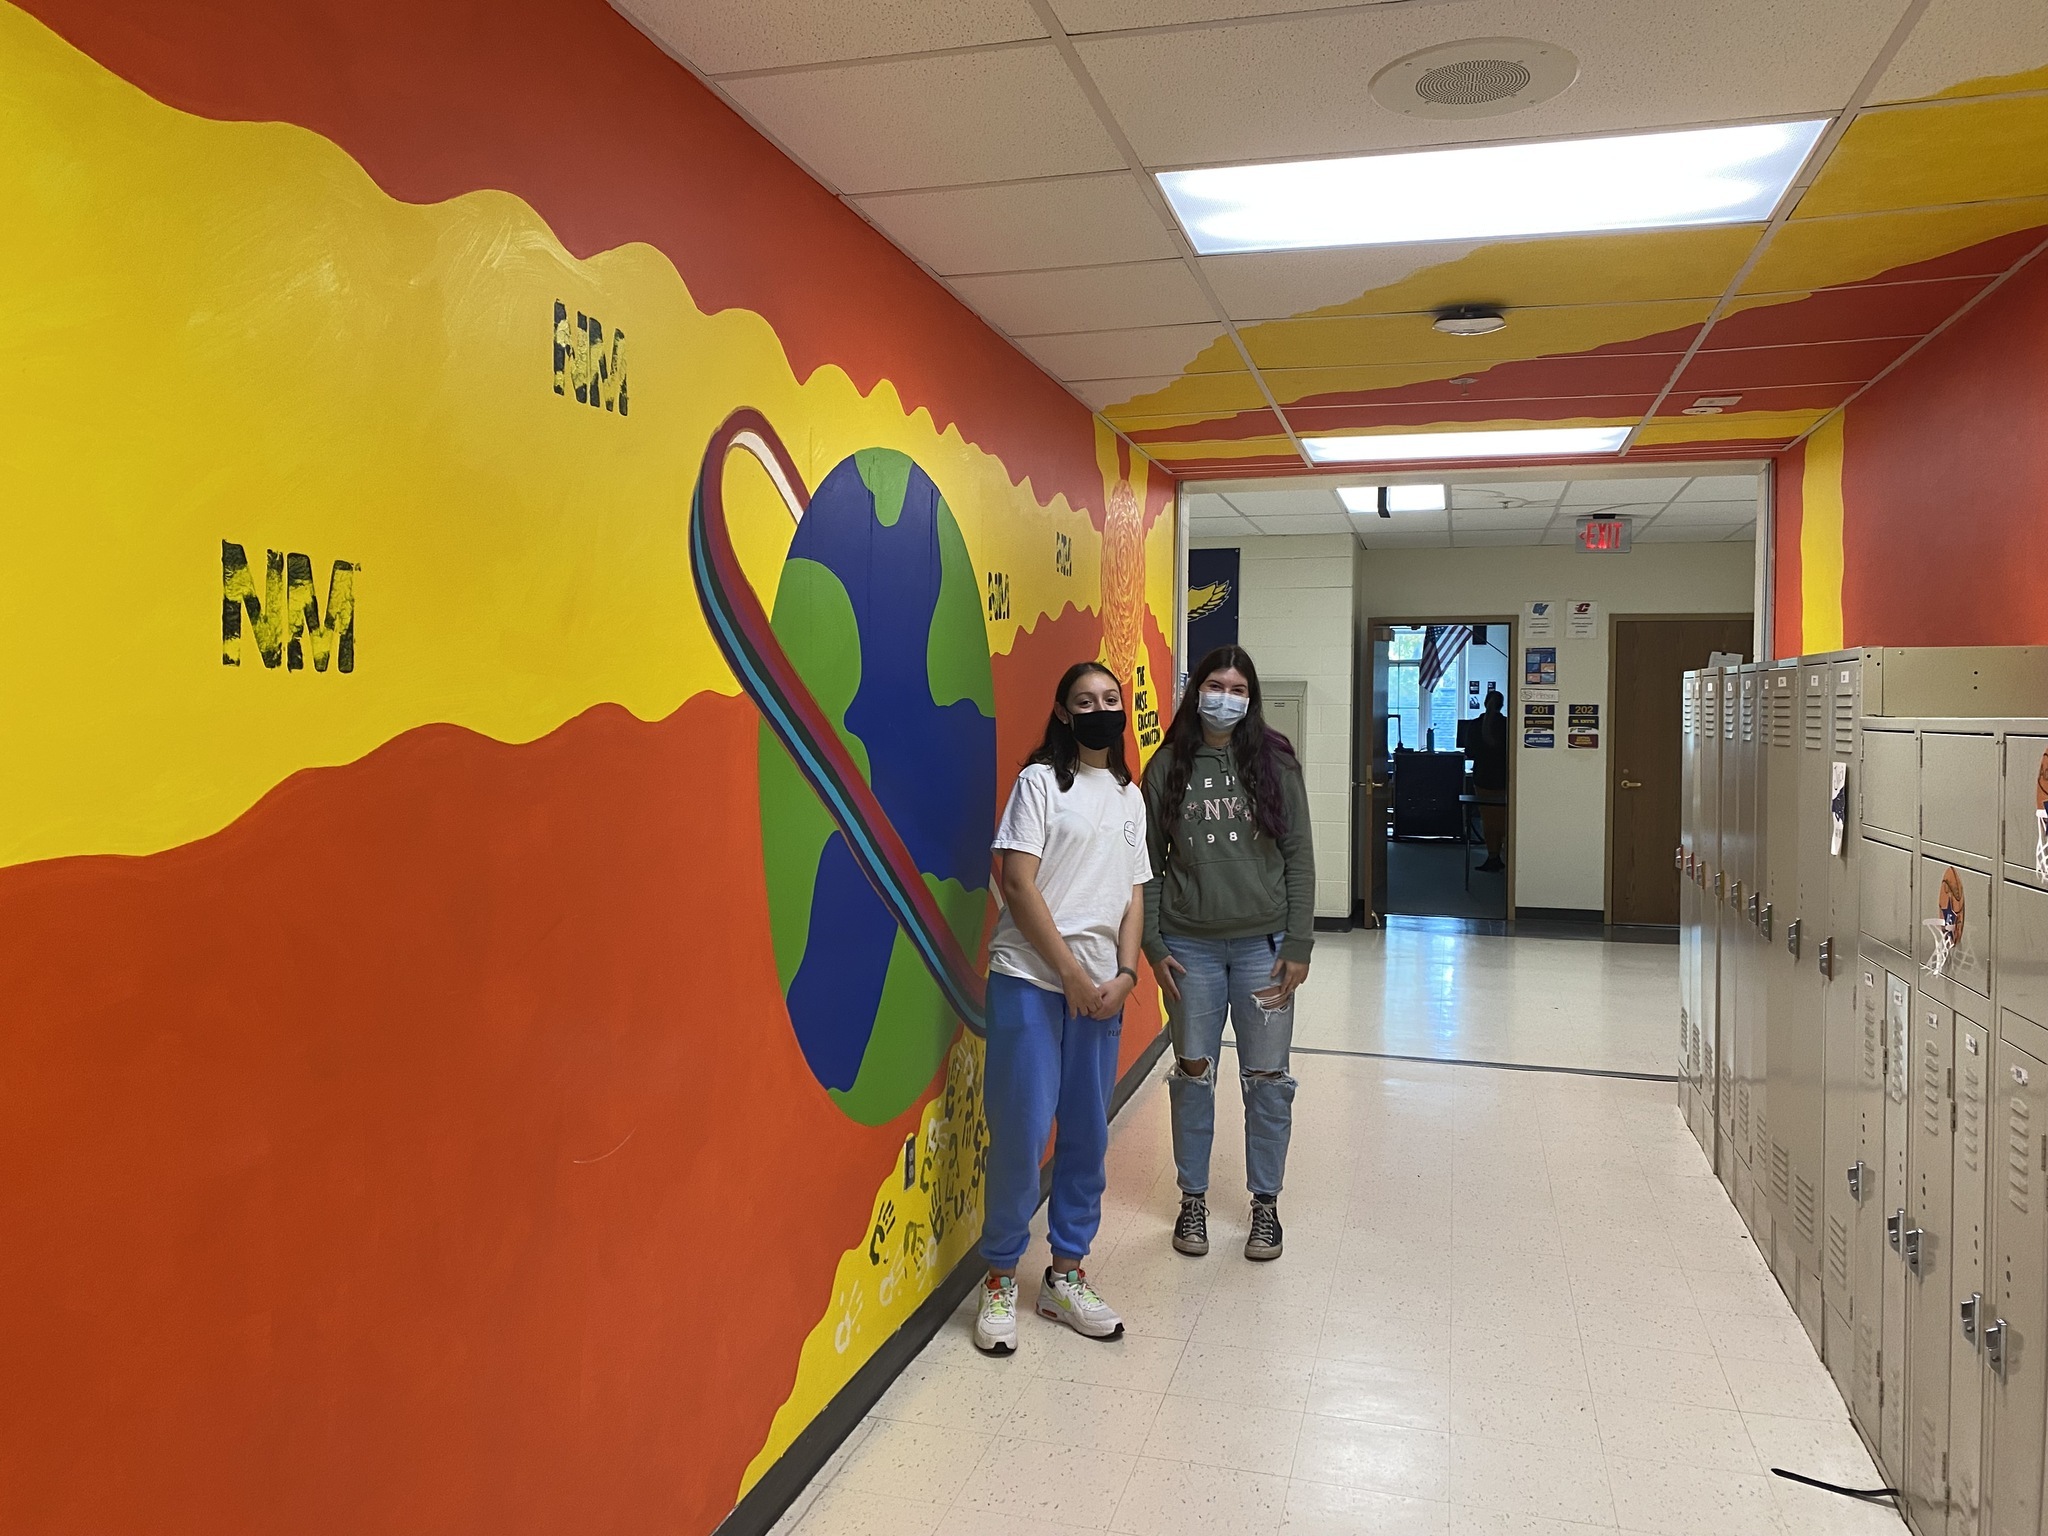 National Art Honor Society created an inspirational mural in the Middle School